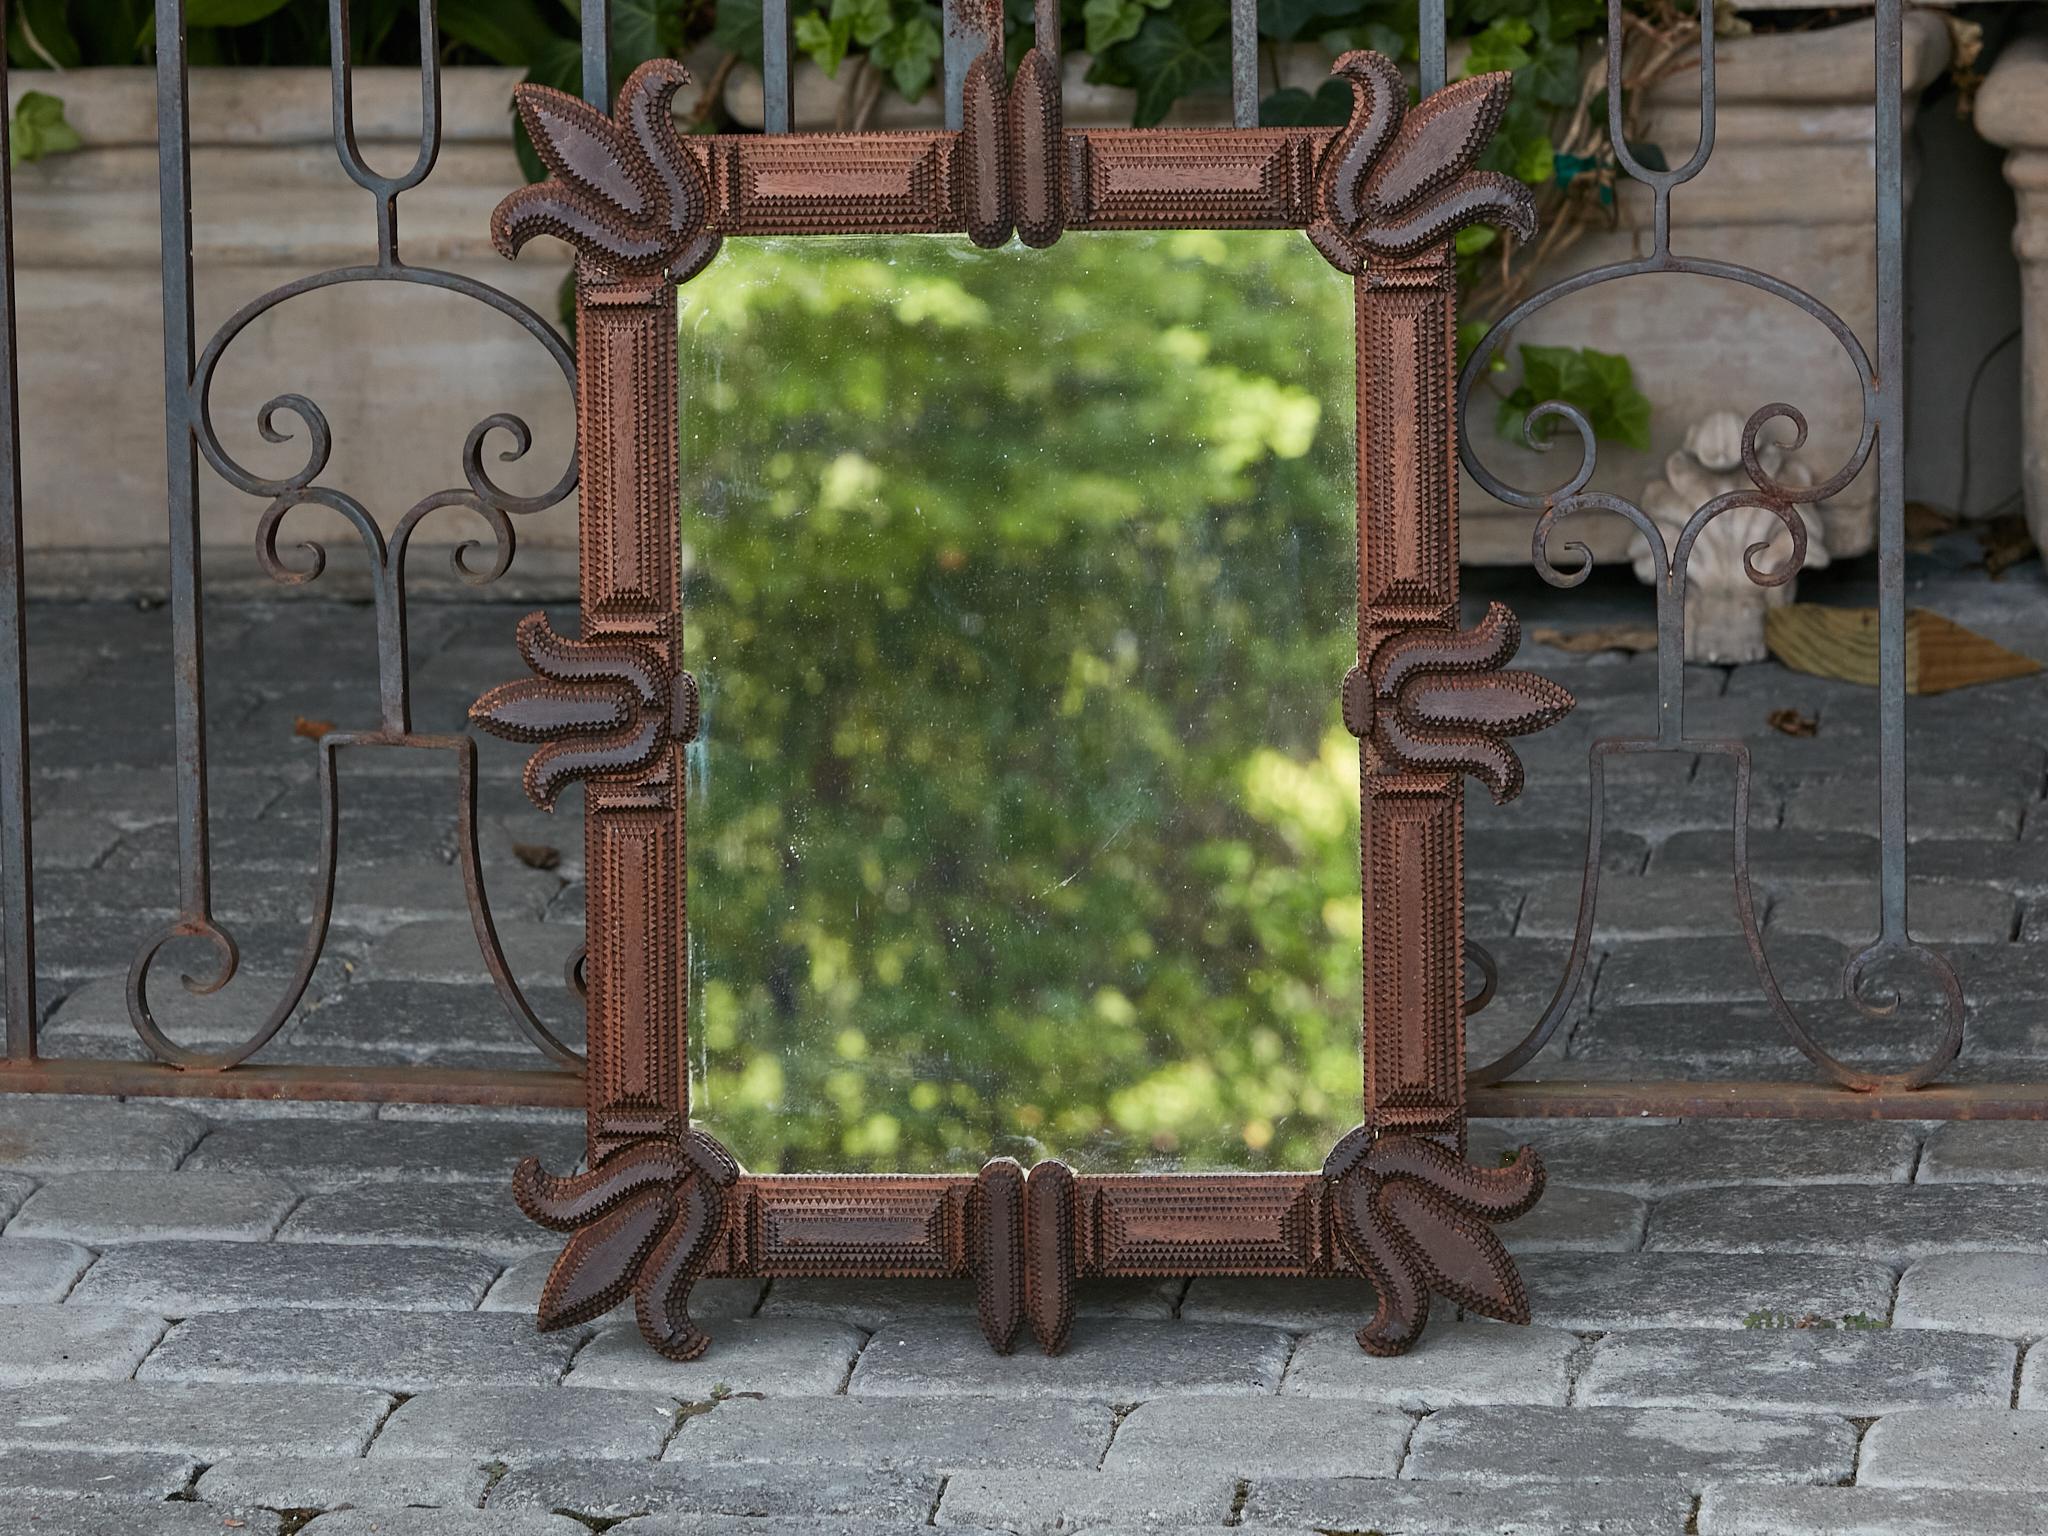 A French Tramp Art mirror from the Turn of the Century, with carved flowers in the corners and center of each side. This French Tramp Art mirror, dating from the Turn of the Century, is a captivating blend of folk artistry and understated elegance.